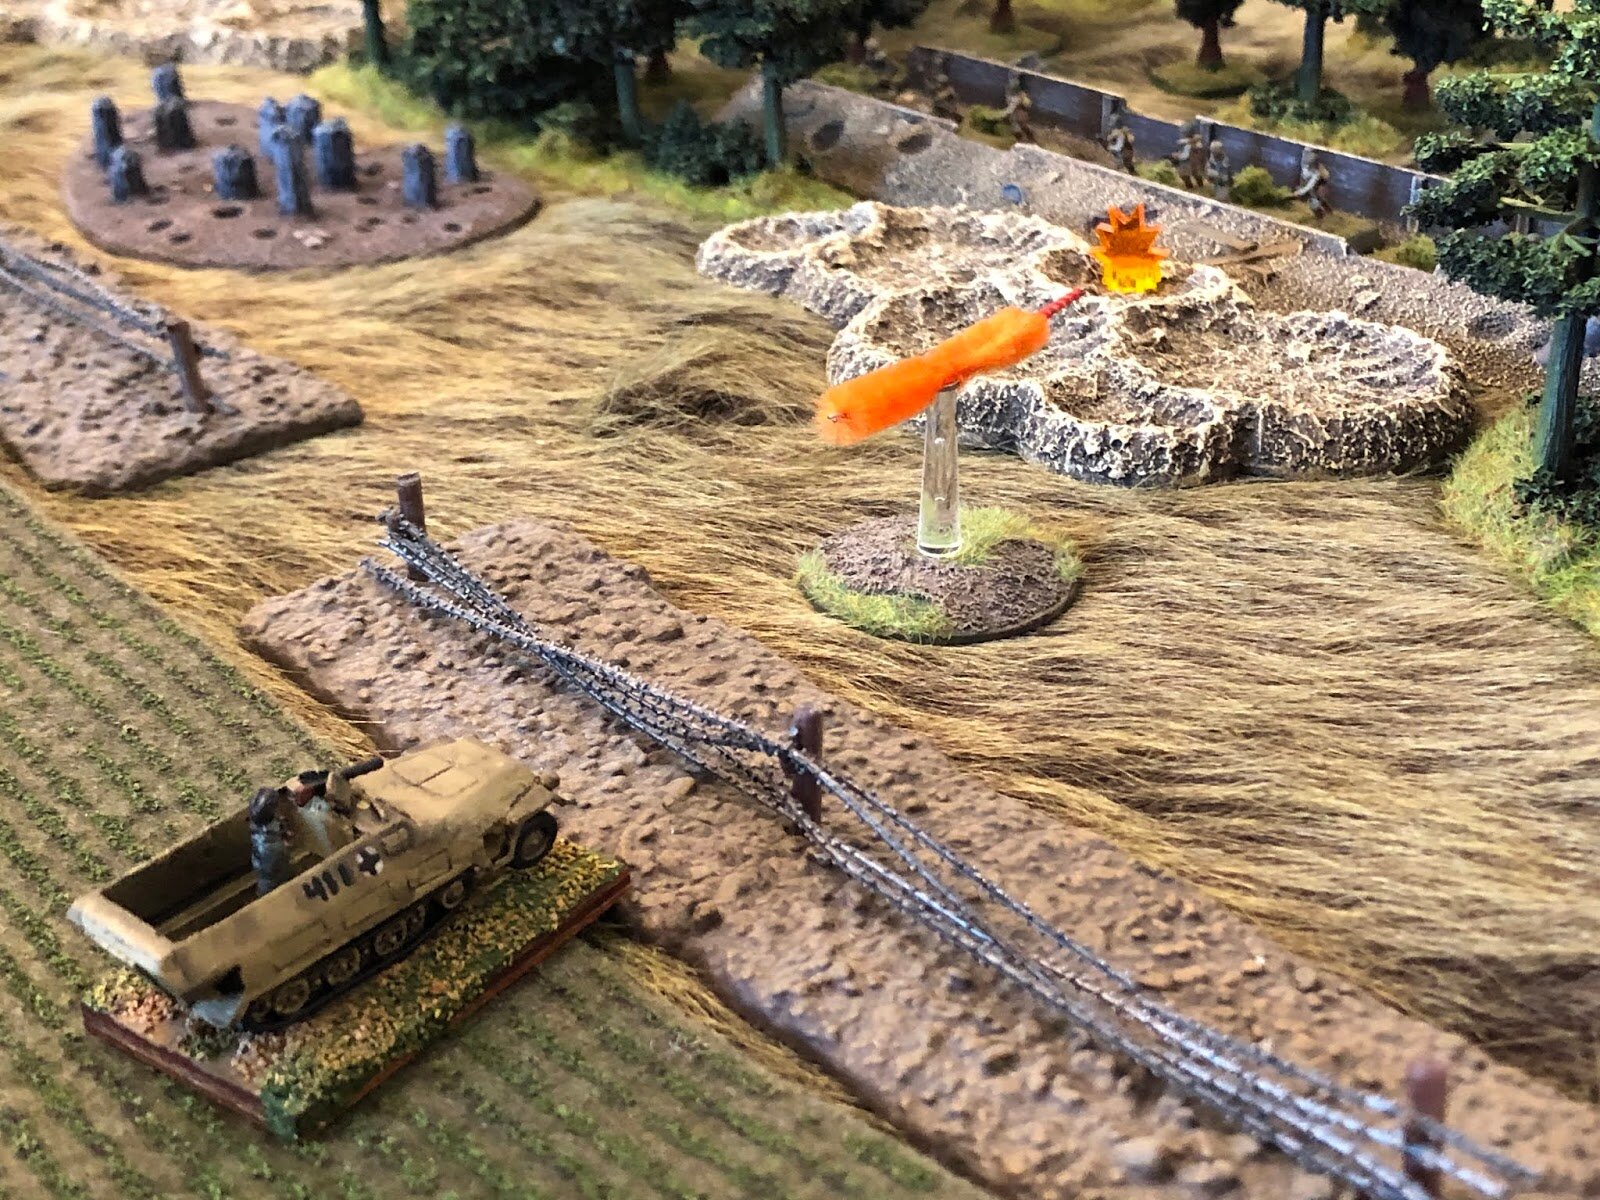  He spots the dug-in enemy infantry and opens fire with his MG-42. 